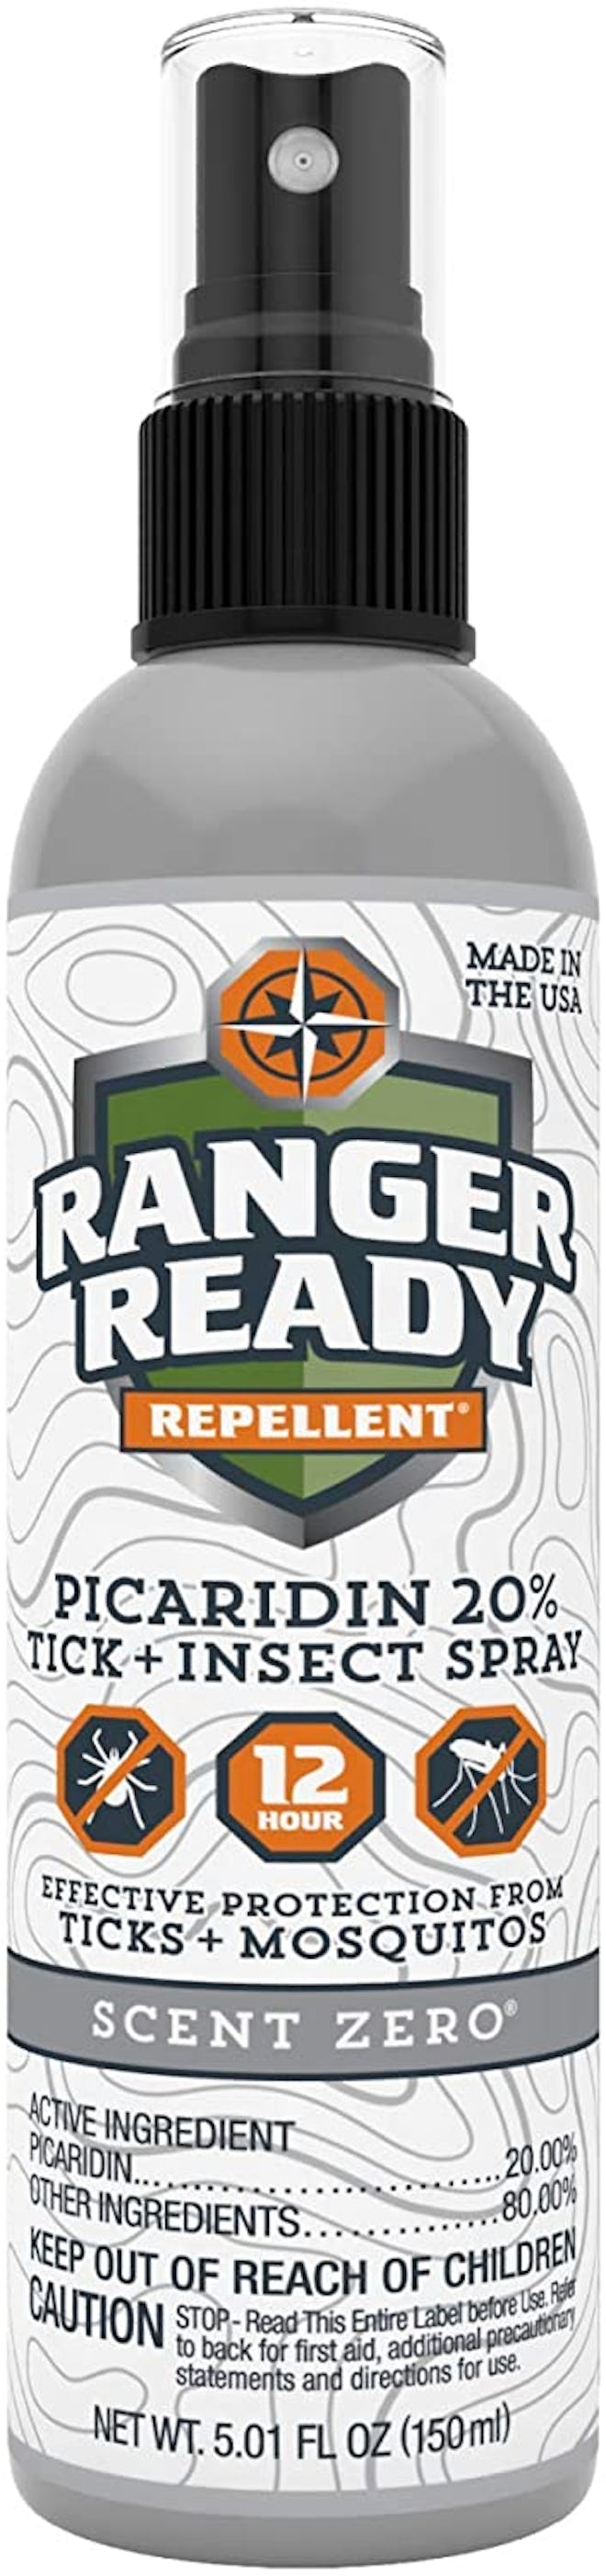 Ranger Ready Tick & Insect Repellent